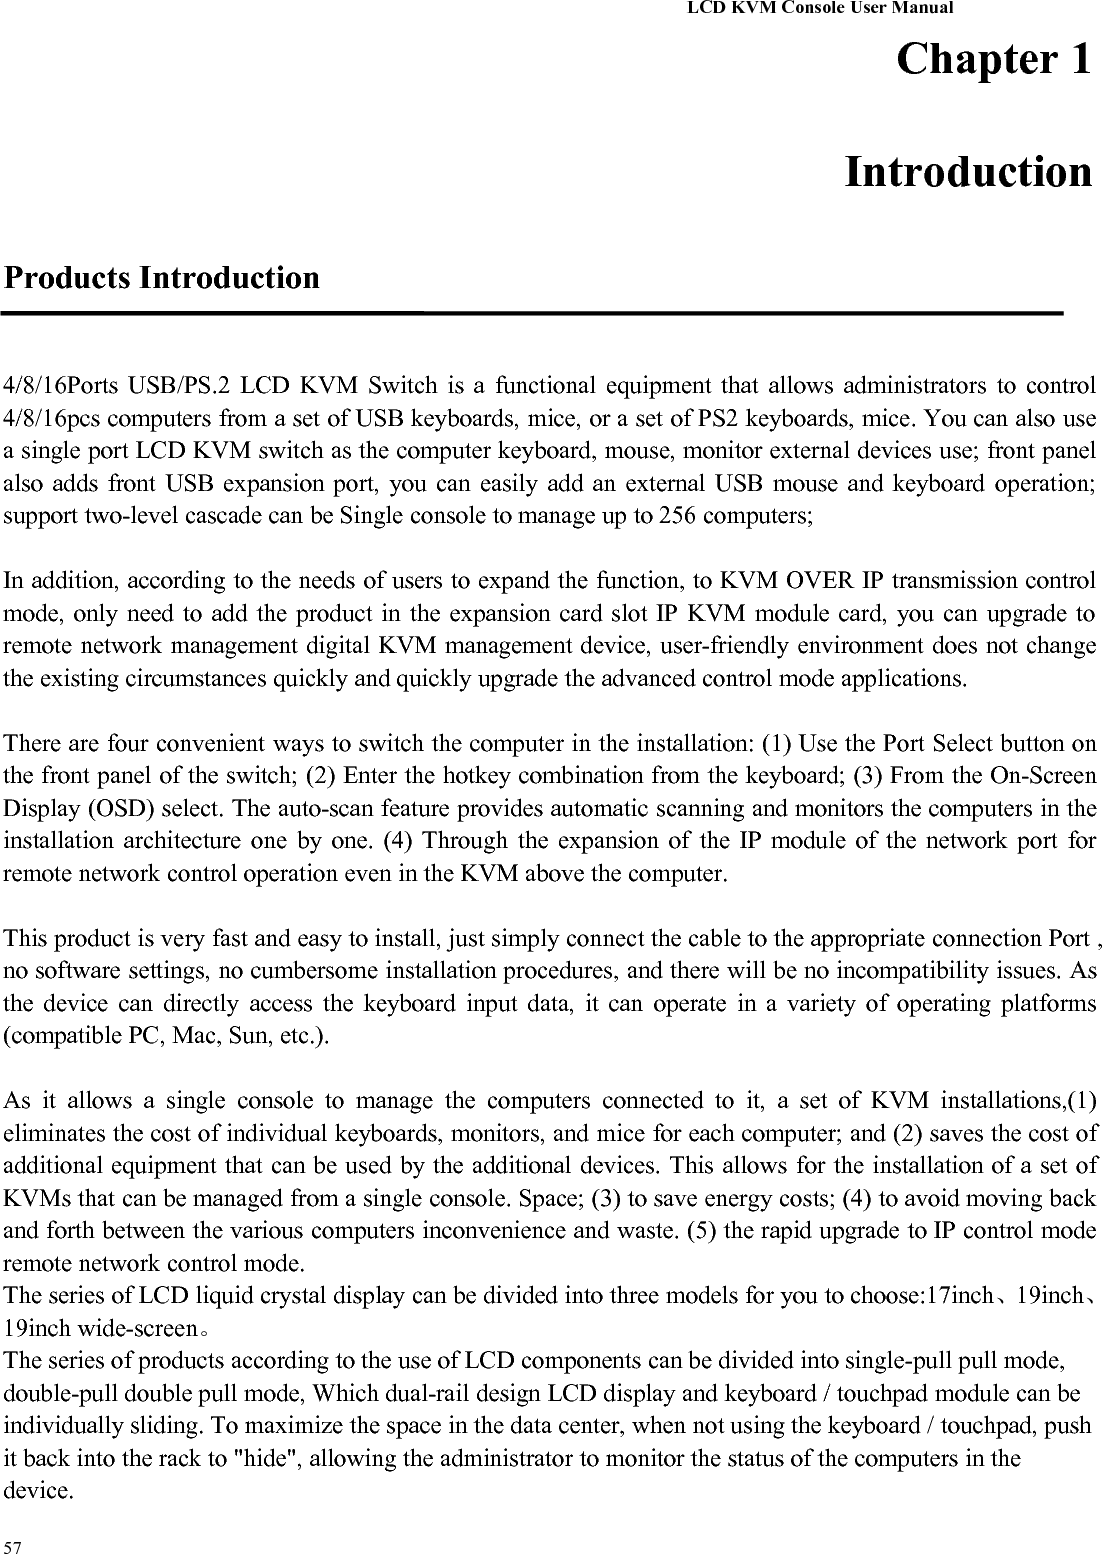 LCD KVM Console User Manual57Chapter 1IntroductionProducts Introduction4/8/16Ports USB/PS.2 LCD KVM Switch is a functional equipment that allows administrators to control4/8/16pcs computers from a set of USB keyboards, mice, or a set of PS2 keyboards, mice. You can also usea single port LCD KVM switch as the computer keyboard, mouse, monitor external devices use; front panelalso adds front USB expansion port, you can easily add an external USB mouse and keyboard operation;support two-level cascade can be Single console to manage up to 256 computers;In addition, according to the needs of users to expand the function, to KVM OVER IP transmission controlmode, only need to add the product in the expansion card slot IP KVM module card, you can upgrade toremote network management digital KVM management device, user-friendly environment does not changethe existing circumstances quickly and quickly upgrade the advanced control mode applications.There are four convenient ways to switch the computer in the installation: (1) Use the Port Select button onthe front panel of the switch; (2) Enter the hotkey combination from the keyboard; (3) From the On-ScreenDisplay (OSD) select. The auto-scan feature provides automatic scanning and monitors the computers in theinstallation architecture one by one. (4) Through the expansion of the IP module of the network port forremote network control operation even in the KVM above the computer.This product is very fast and easy to install, just simply connect the cable to the appropriate connection Port ,no software settings, no cumbersome installation procedures, and there will be no incompatibility issues. Asthe device can directly access the keyboard input data, it can operate in a variety of operating platforms(compatible PC, Mac, Sun, etc.).As it allows a single console to manage the computers connected to it, a set of KVM installations,(1)eliminates the cost of individual keyboards, monitors, and mice for each computer; and (2) saves the cost ofadditional equipment that can be used by the additional devices. This allows for the installation of a set ofKVMs that can be managed from a single console. Space; (3) to save energy costs; (4) to avoid moving backand forth between the various computers inconvenience and waste. (5) the rapid upgrade to IP control moderemote network control mode.The series of LCD liquid crystal display can be divided into three models for you to choose:17inch、19inch、19inch wide-screen。The series of products according to the use of LCD components can be divided into single-pull pull mode,double-pull double pull mode, Which dual-rail design LCD display and keyboard / touchpad module can beindividually sliding. To maximize the space in the data center, when not using the keyboard / touchpad, pushit back into the rack to &quot;hide&quot;, allowing the administrator to monitor the status of the computers in thedevice.